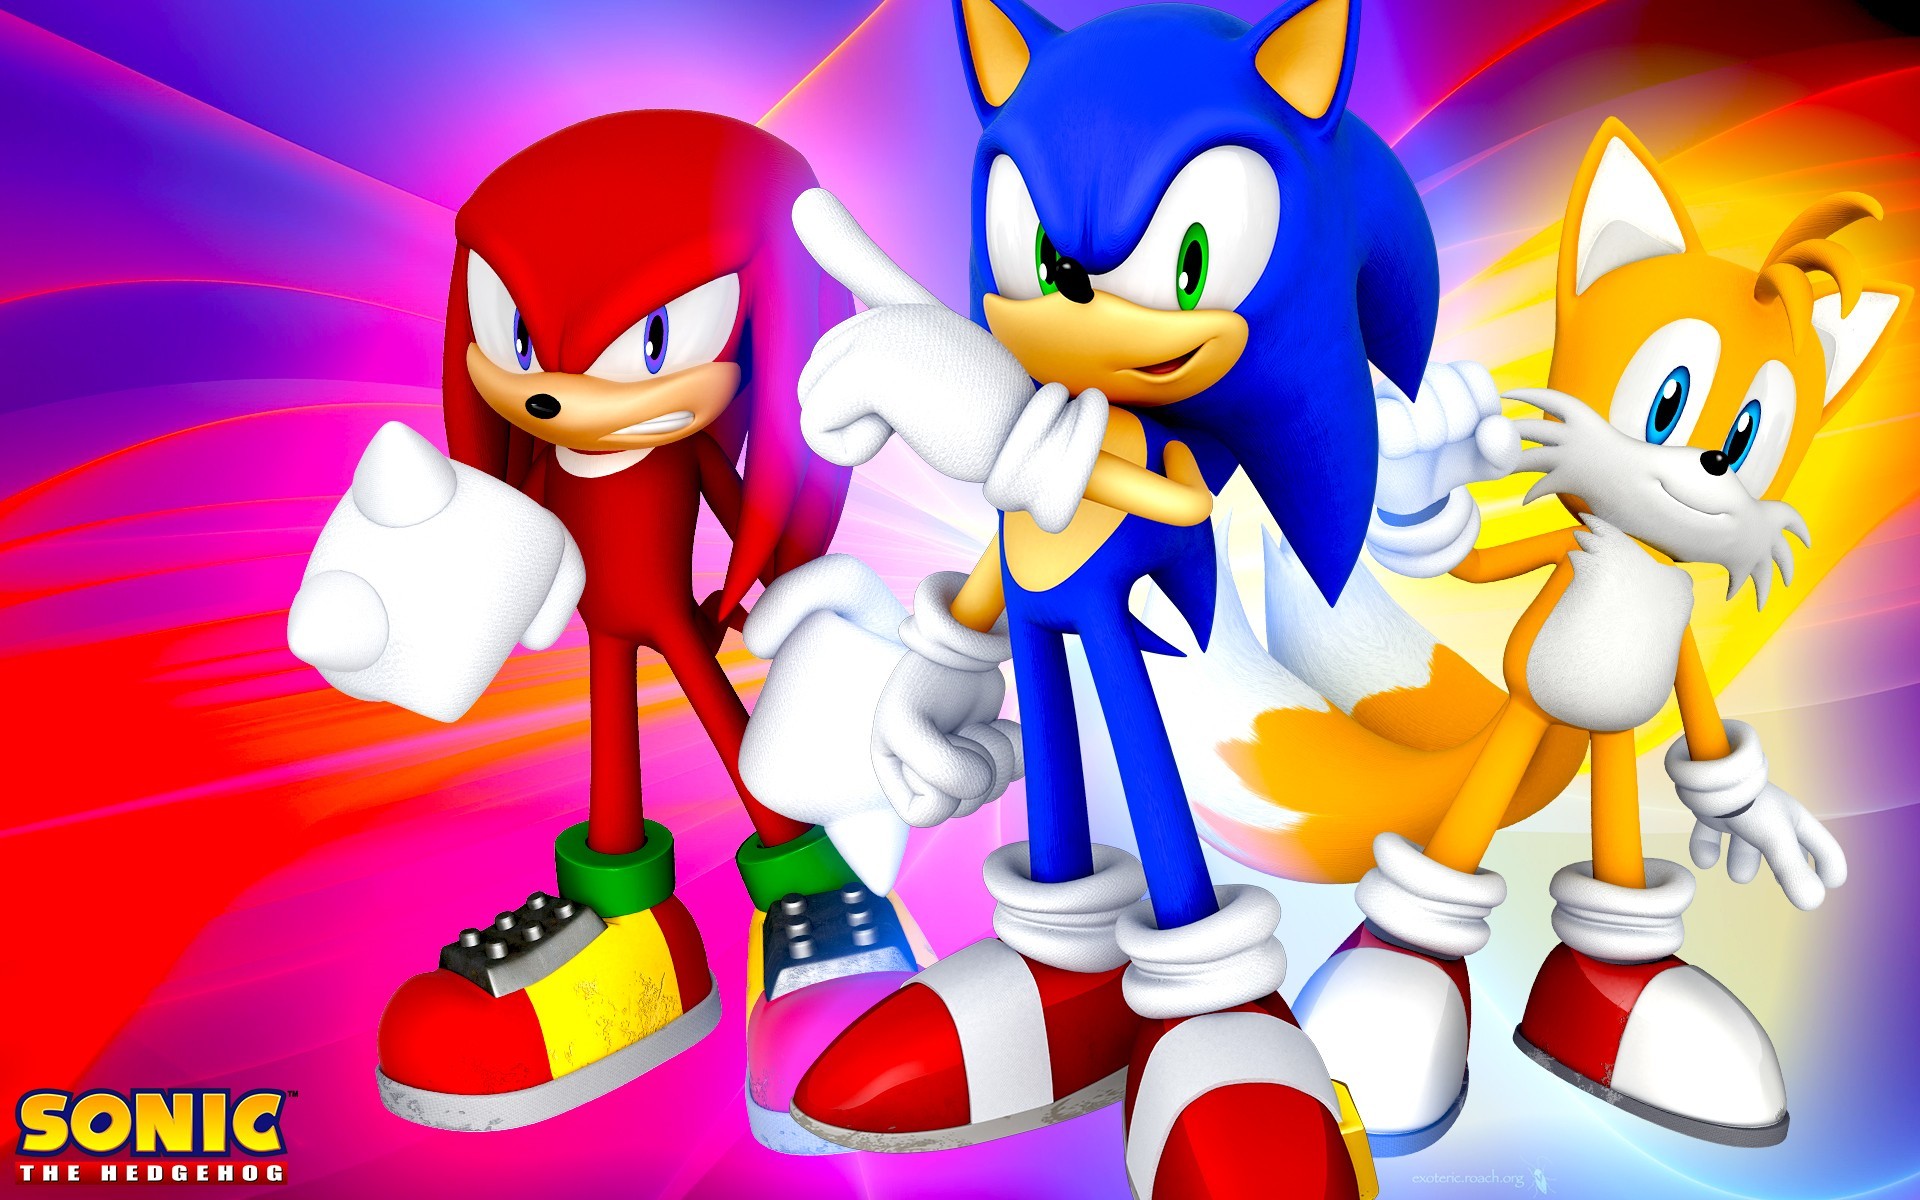 Video Game – Sonic the Hedgehog Miles "Tails" Prower Knuckles the Echidna  Wallpaper